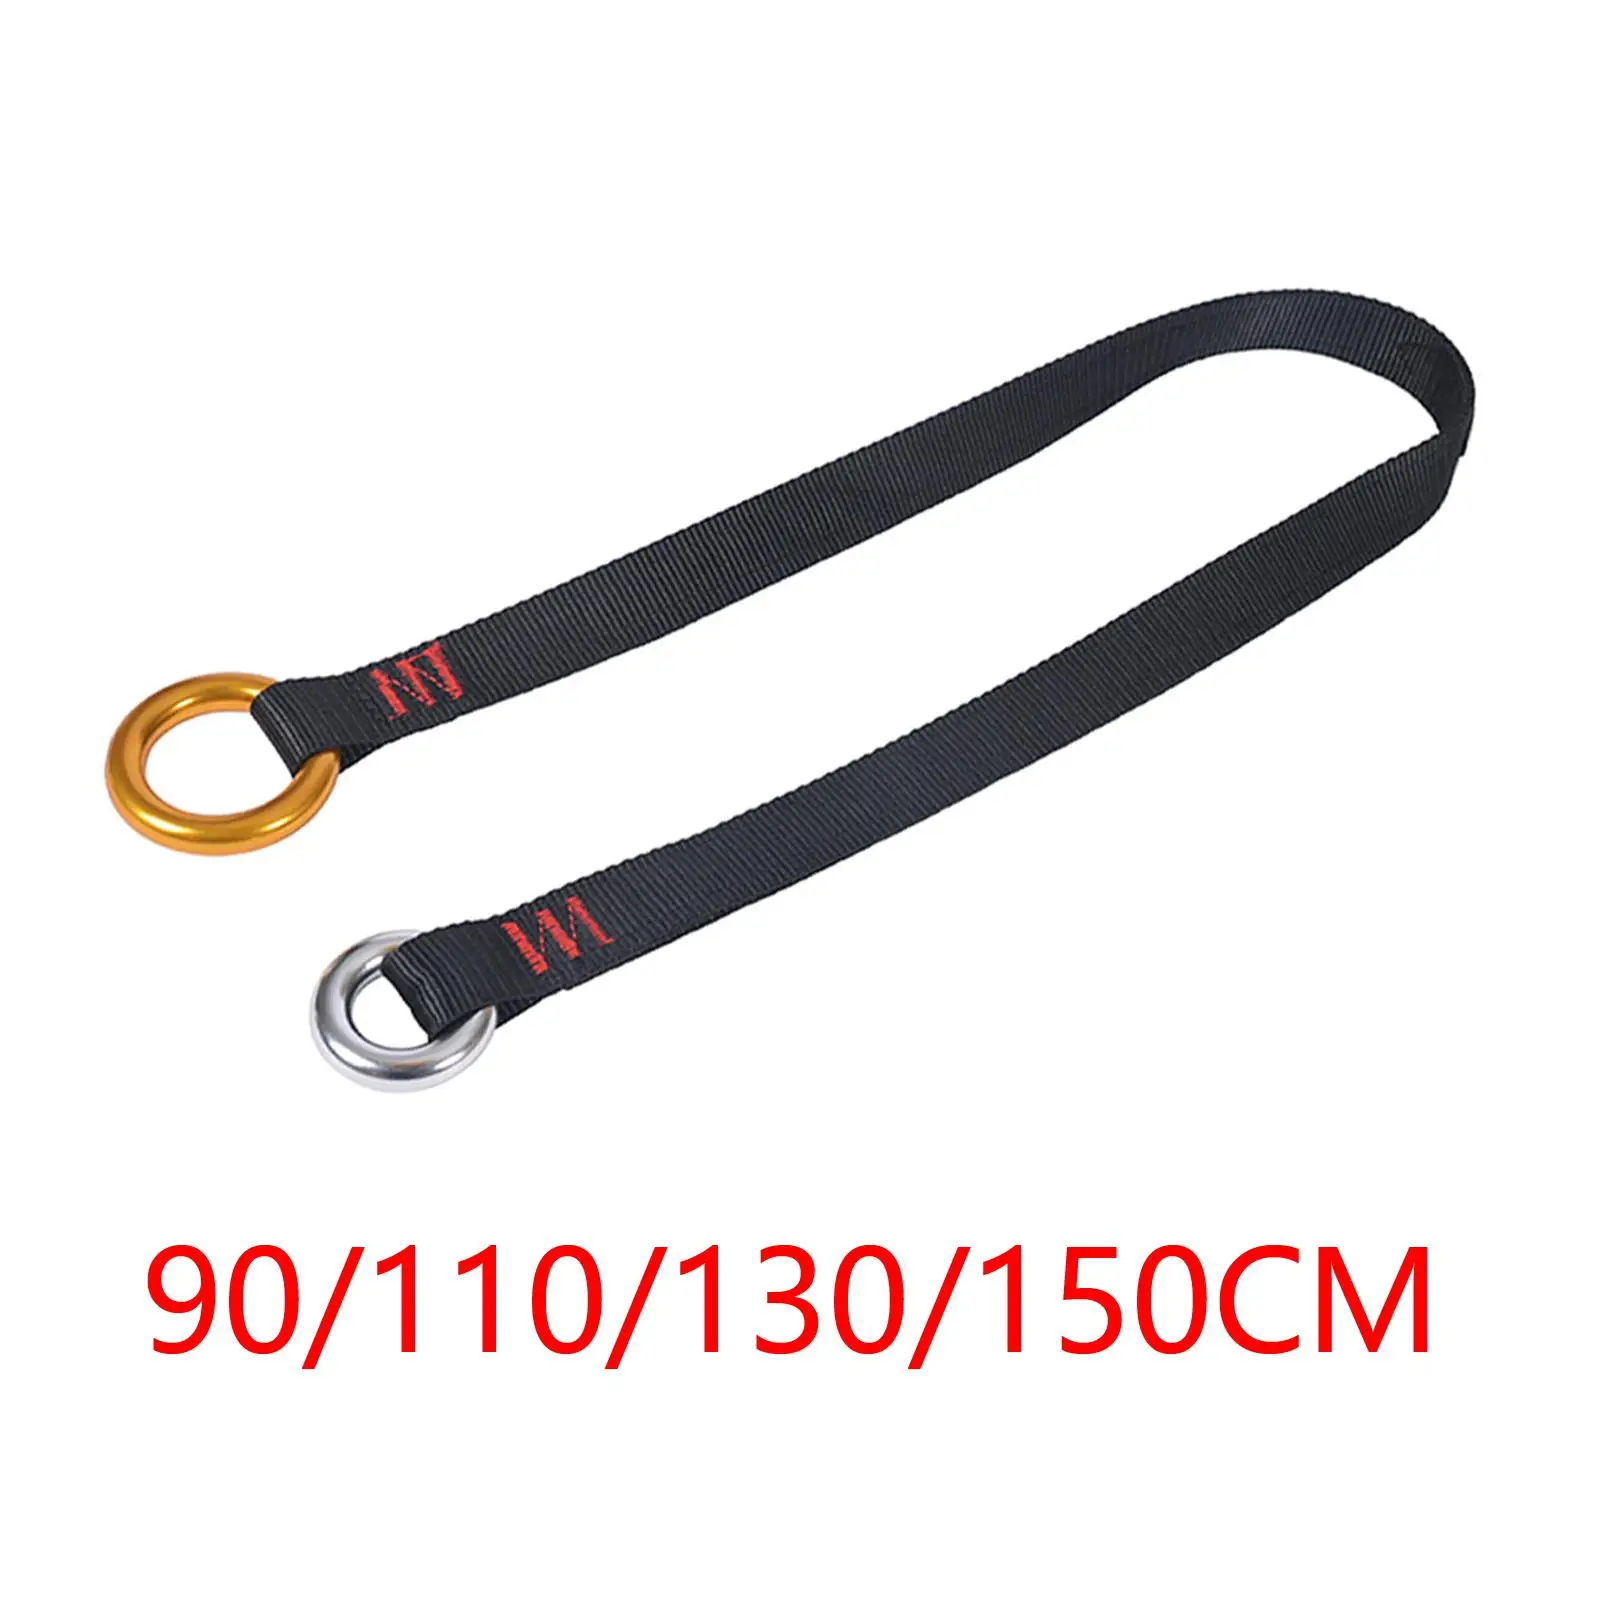 Climbing Rope Friction Saver Sling Link for Garden Work Mountaineering